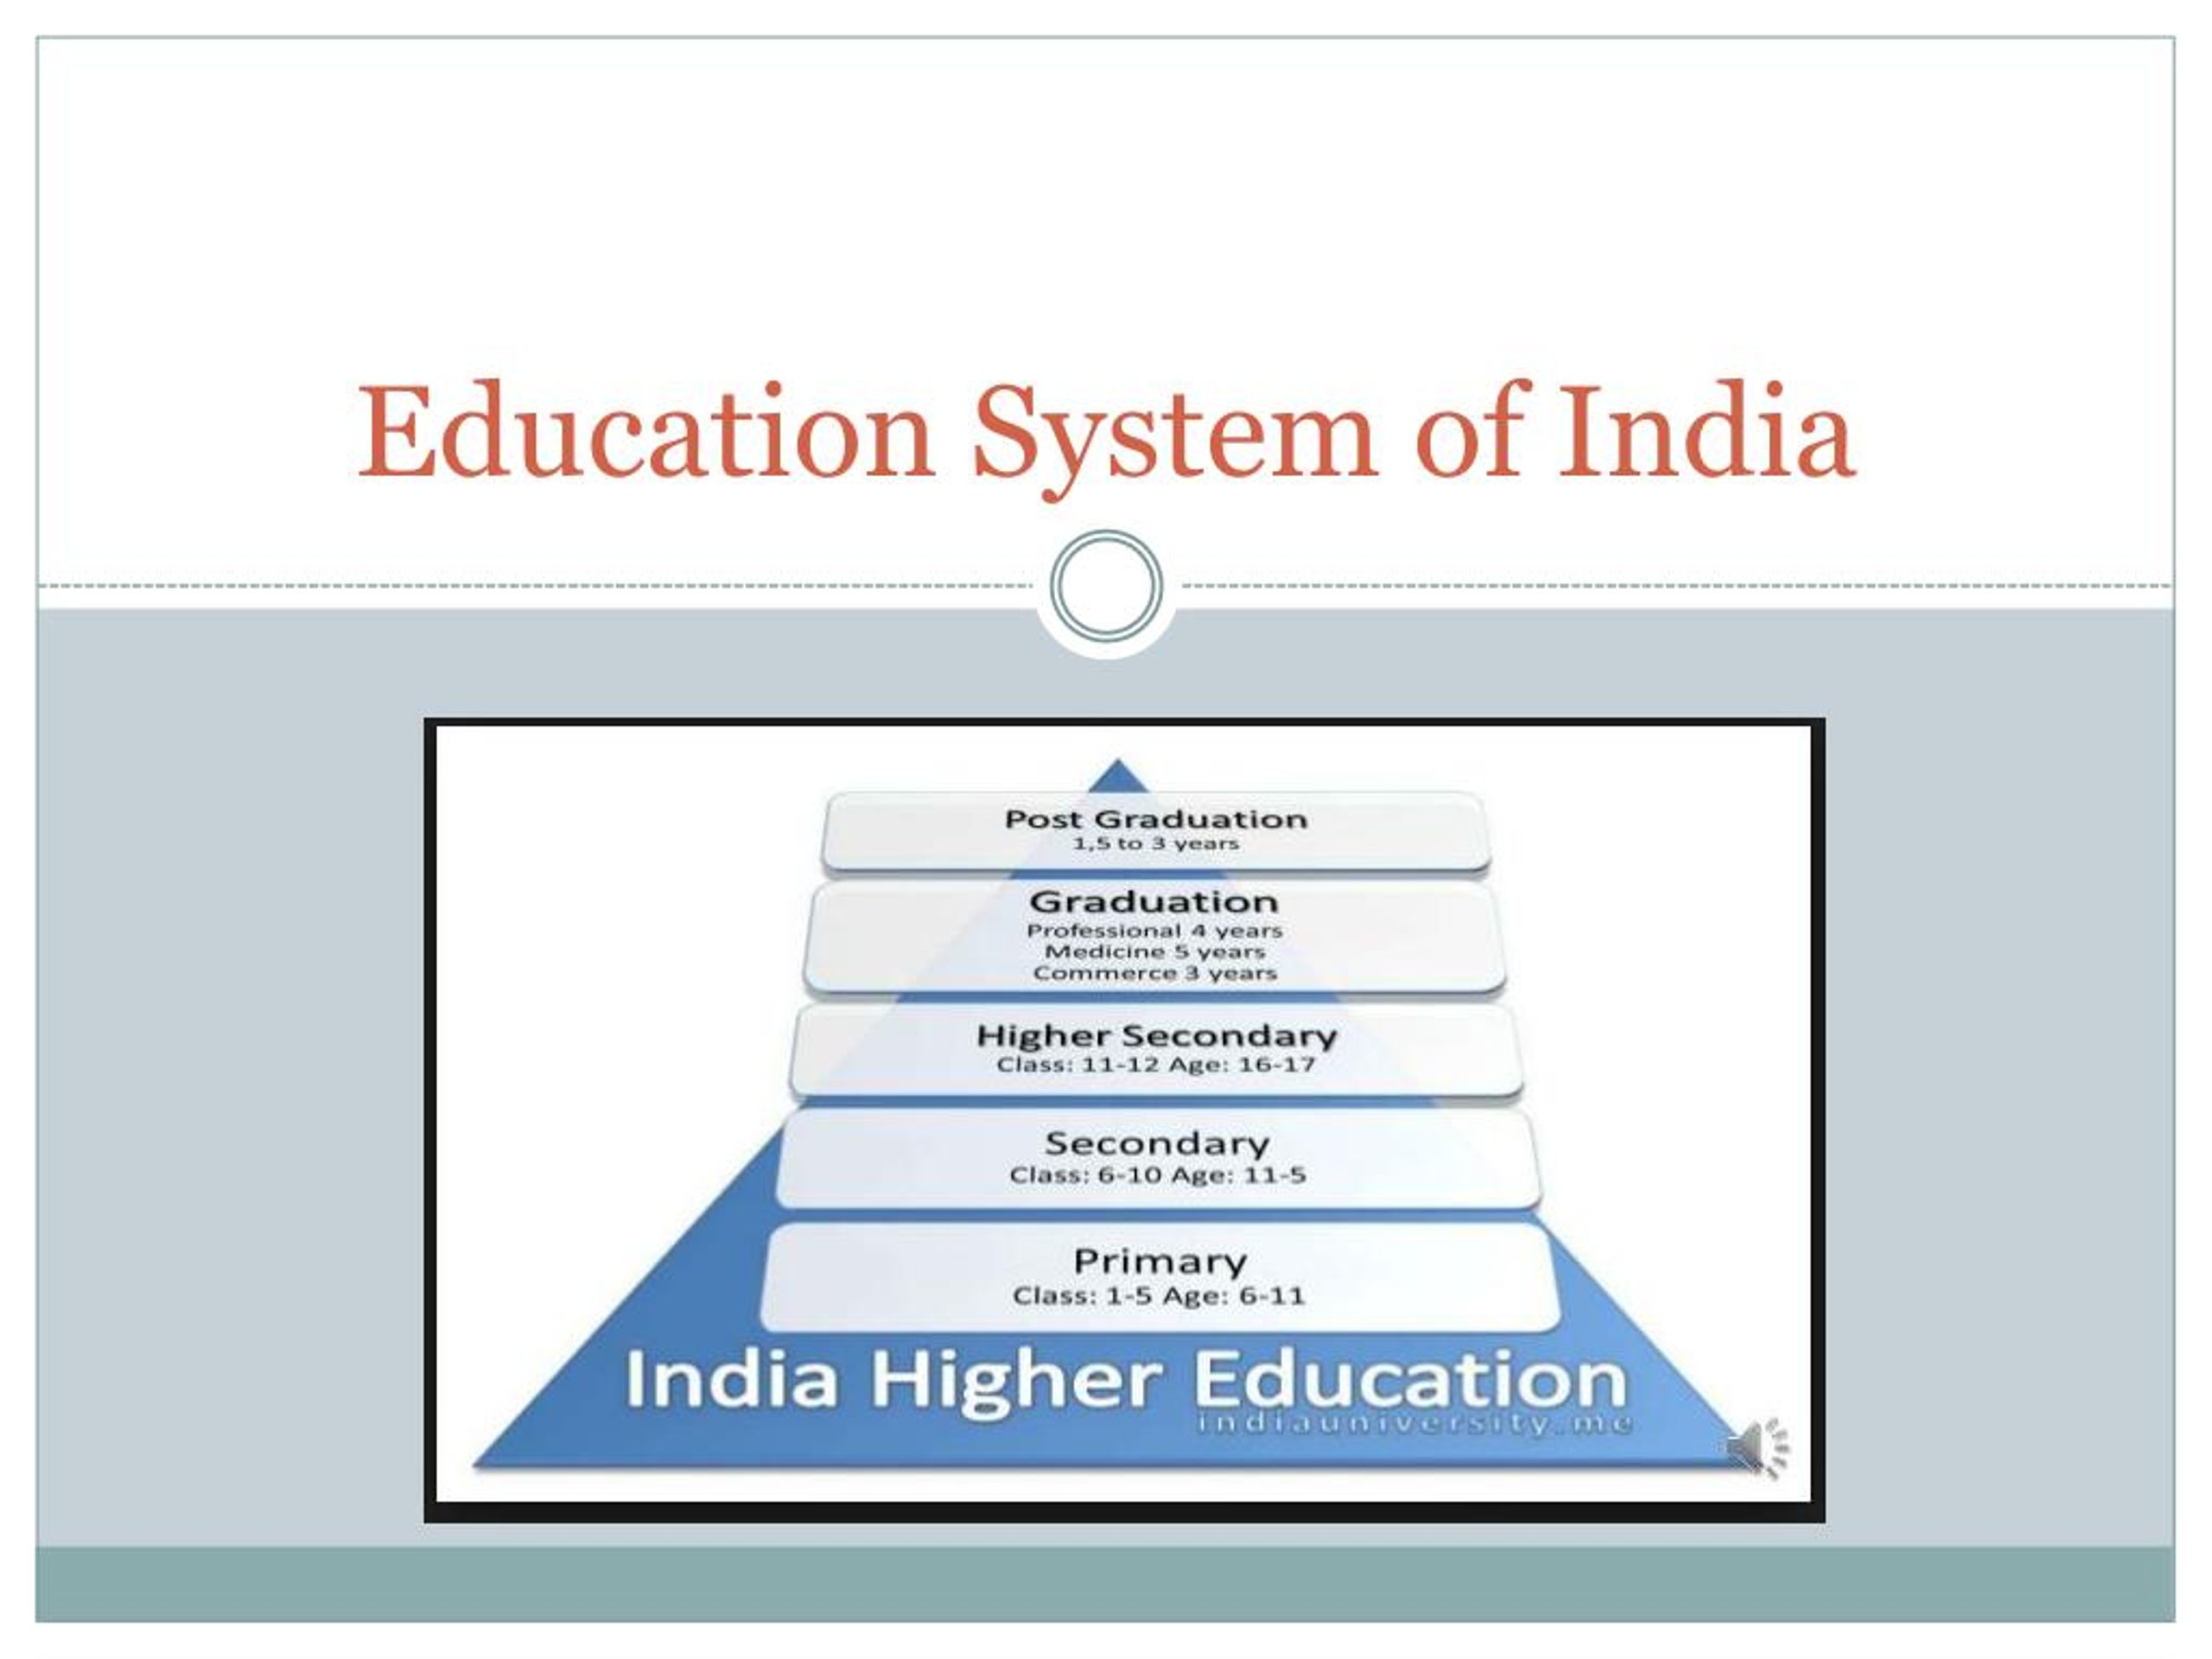 presentation on educational system in india